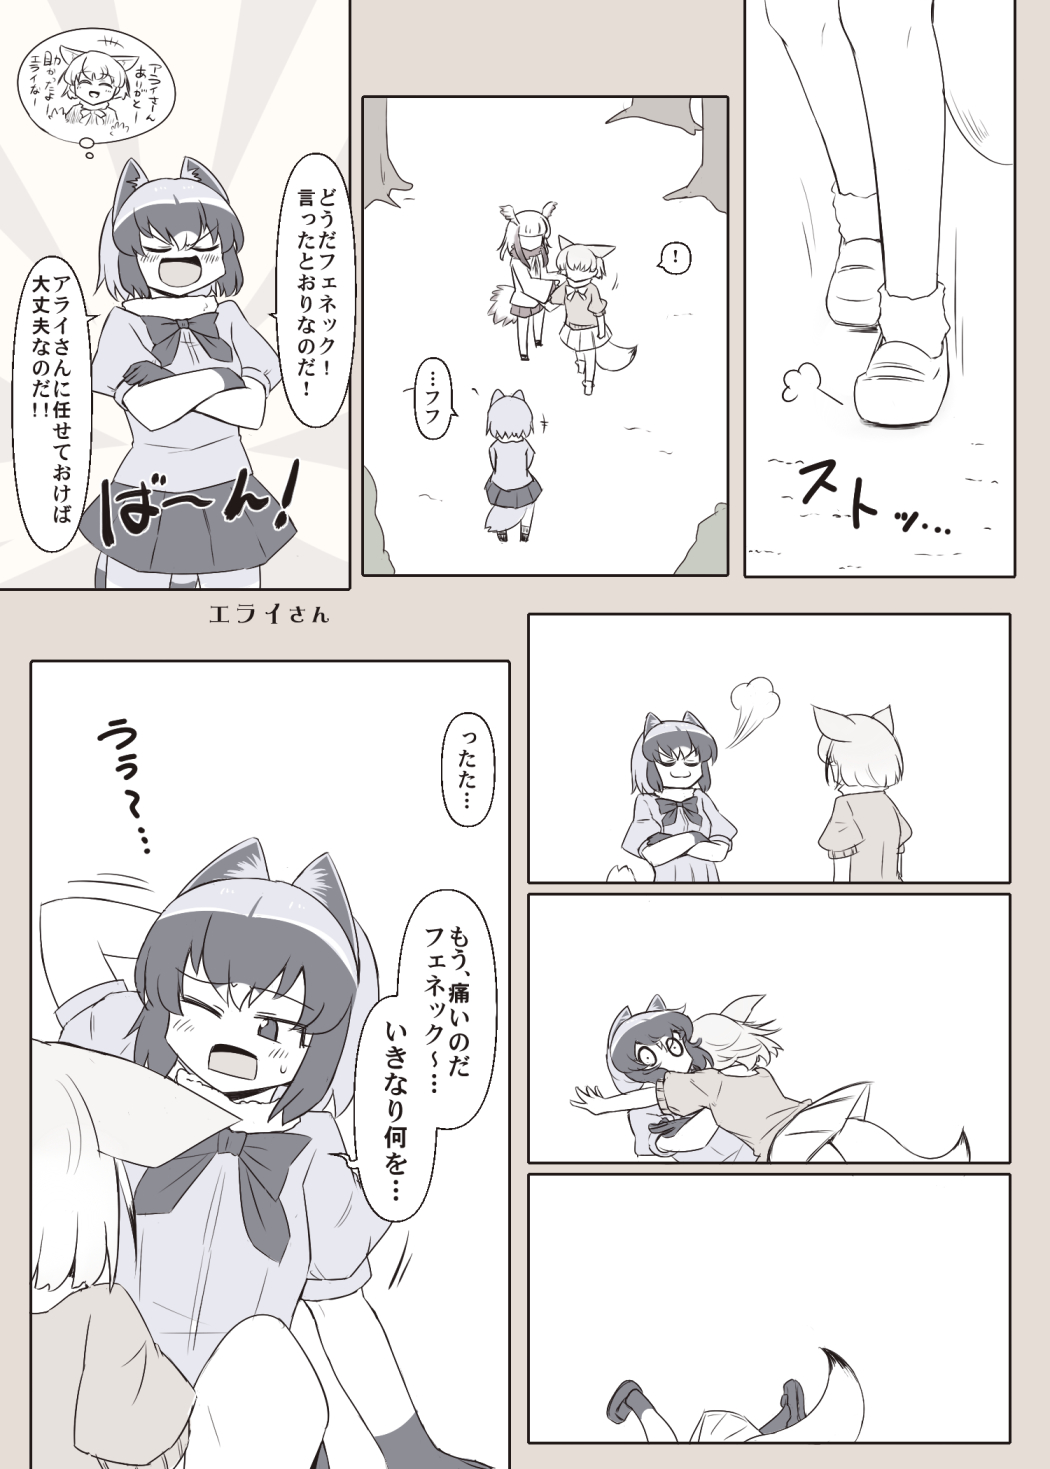 3girls =3 animal_ears bird_tail bird_wings bow bowtie closed_eyes comic common_raccoon_(kemono_friends) crossed_arms eyebrows_visible_through_hair fennec_(kemono_friends) fox_ears fox_tail fur_collar glomp head_wings highres hug japanese_crested_ibis_(kemono_friends) kemono_friends multiple_girls open_mouth raccoon_ears raccoon_tail shiozaki16 short_sleeves skirt smile spoken_exclamation_mark standing striped_tail surprised sweater tail translation_request v-shaped_eyebrows wide-eyed wings |d